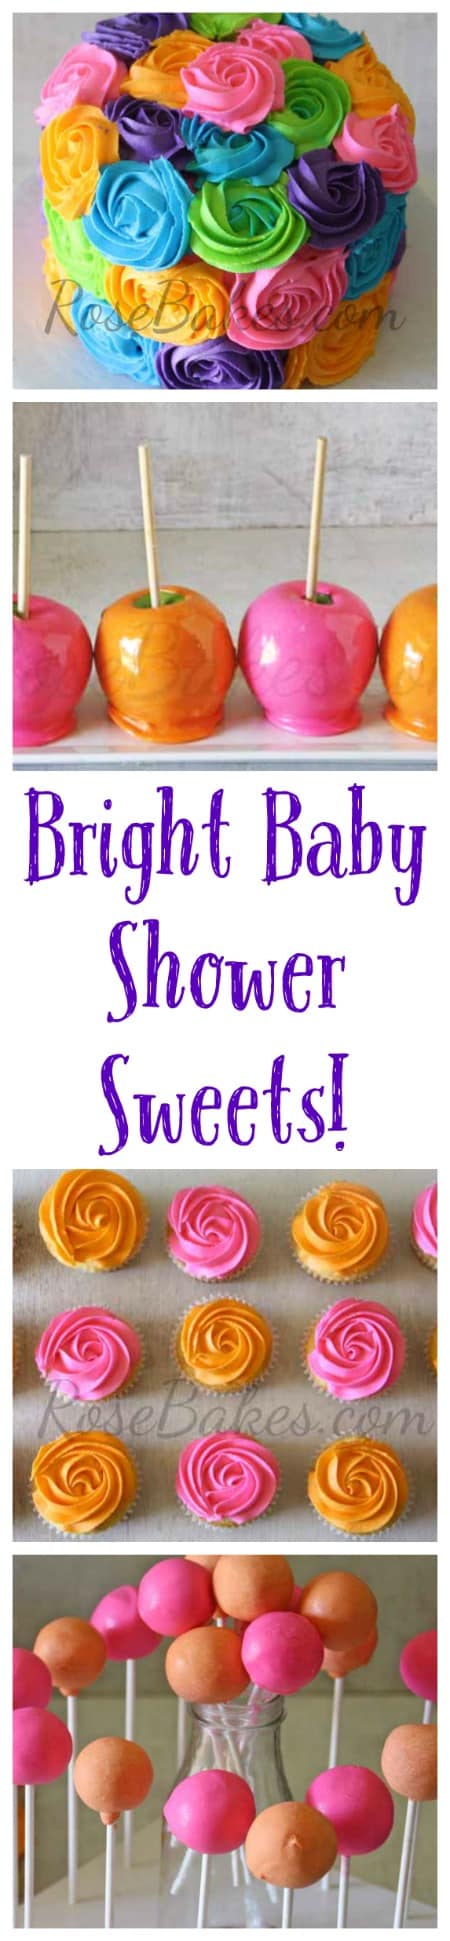 Bright Baby Shower Sweets